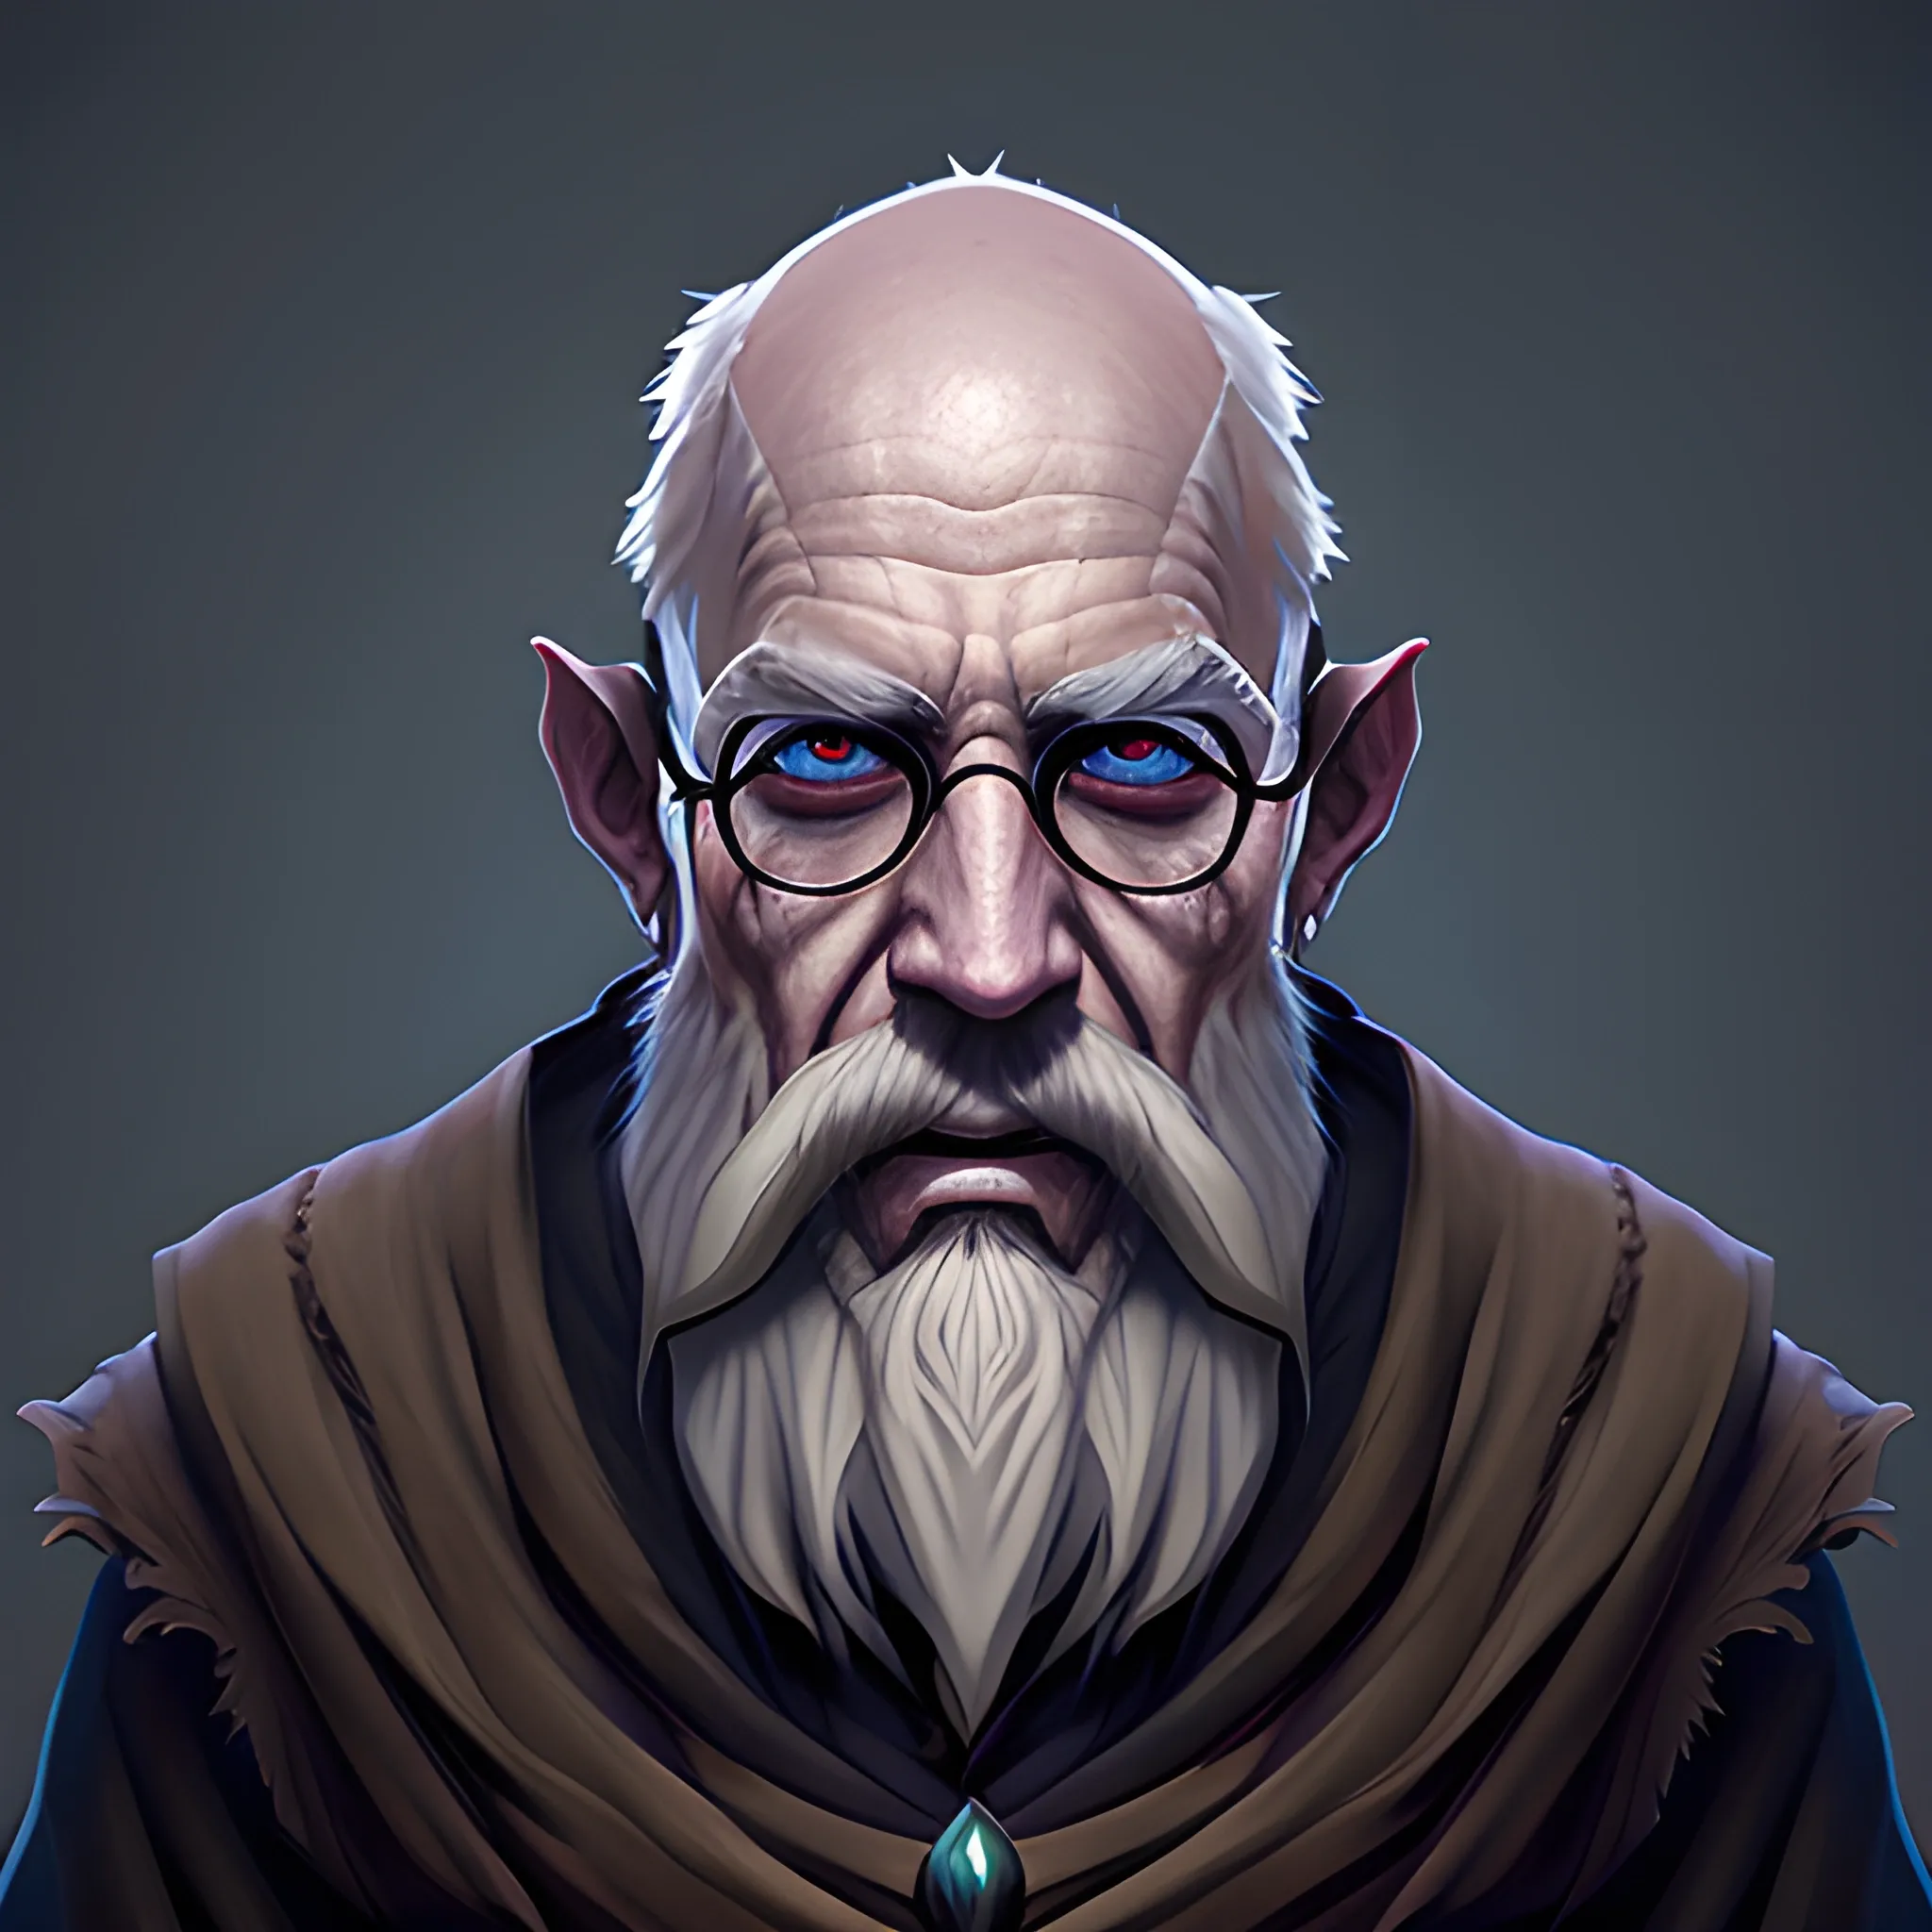 withered oldman mage fantasy art
